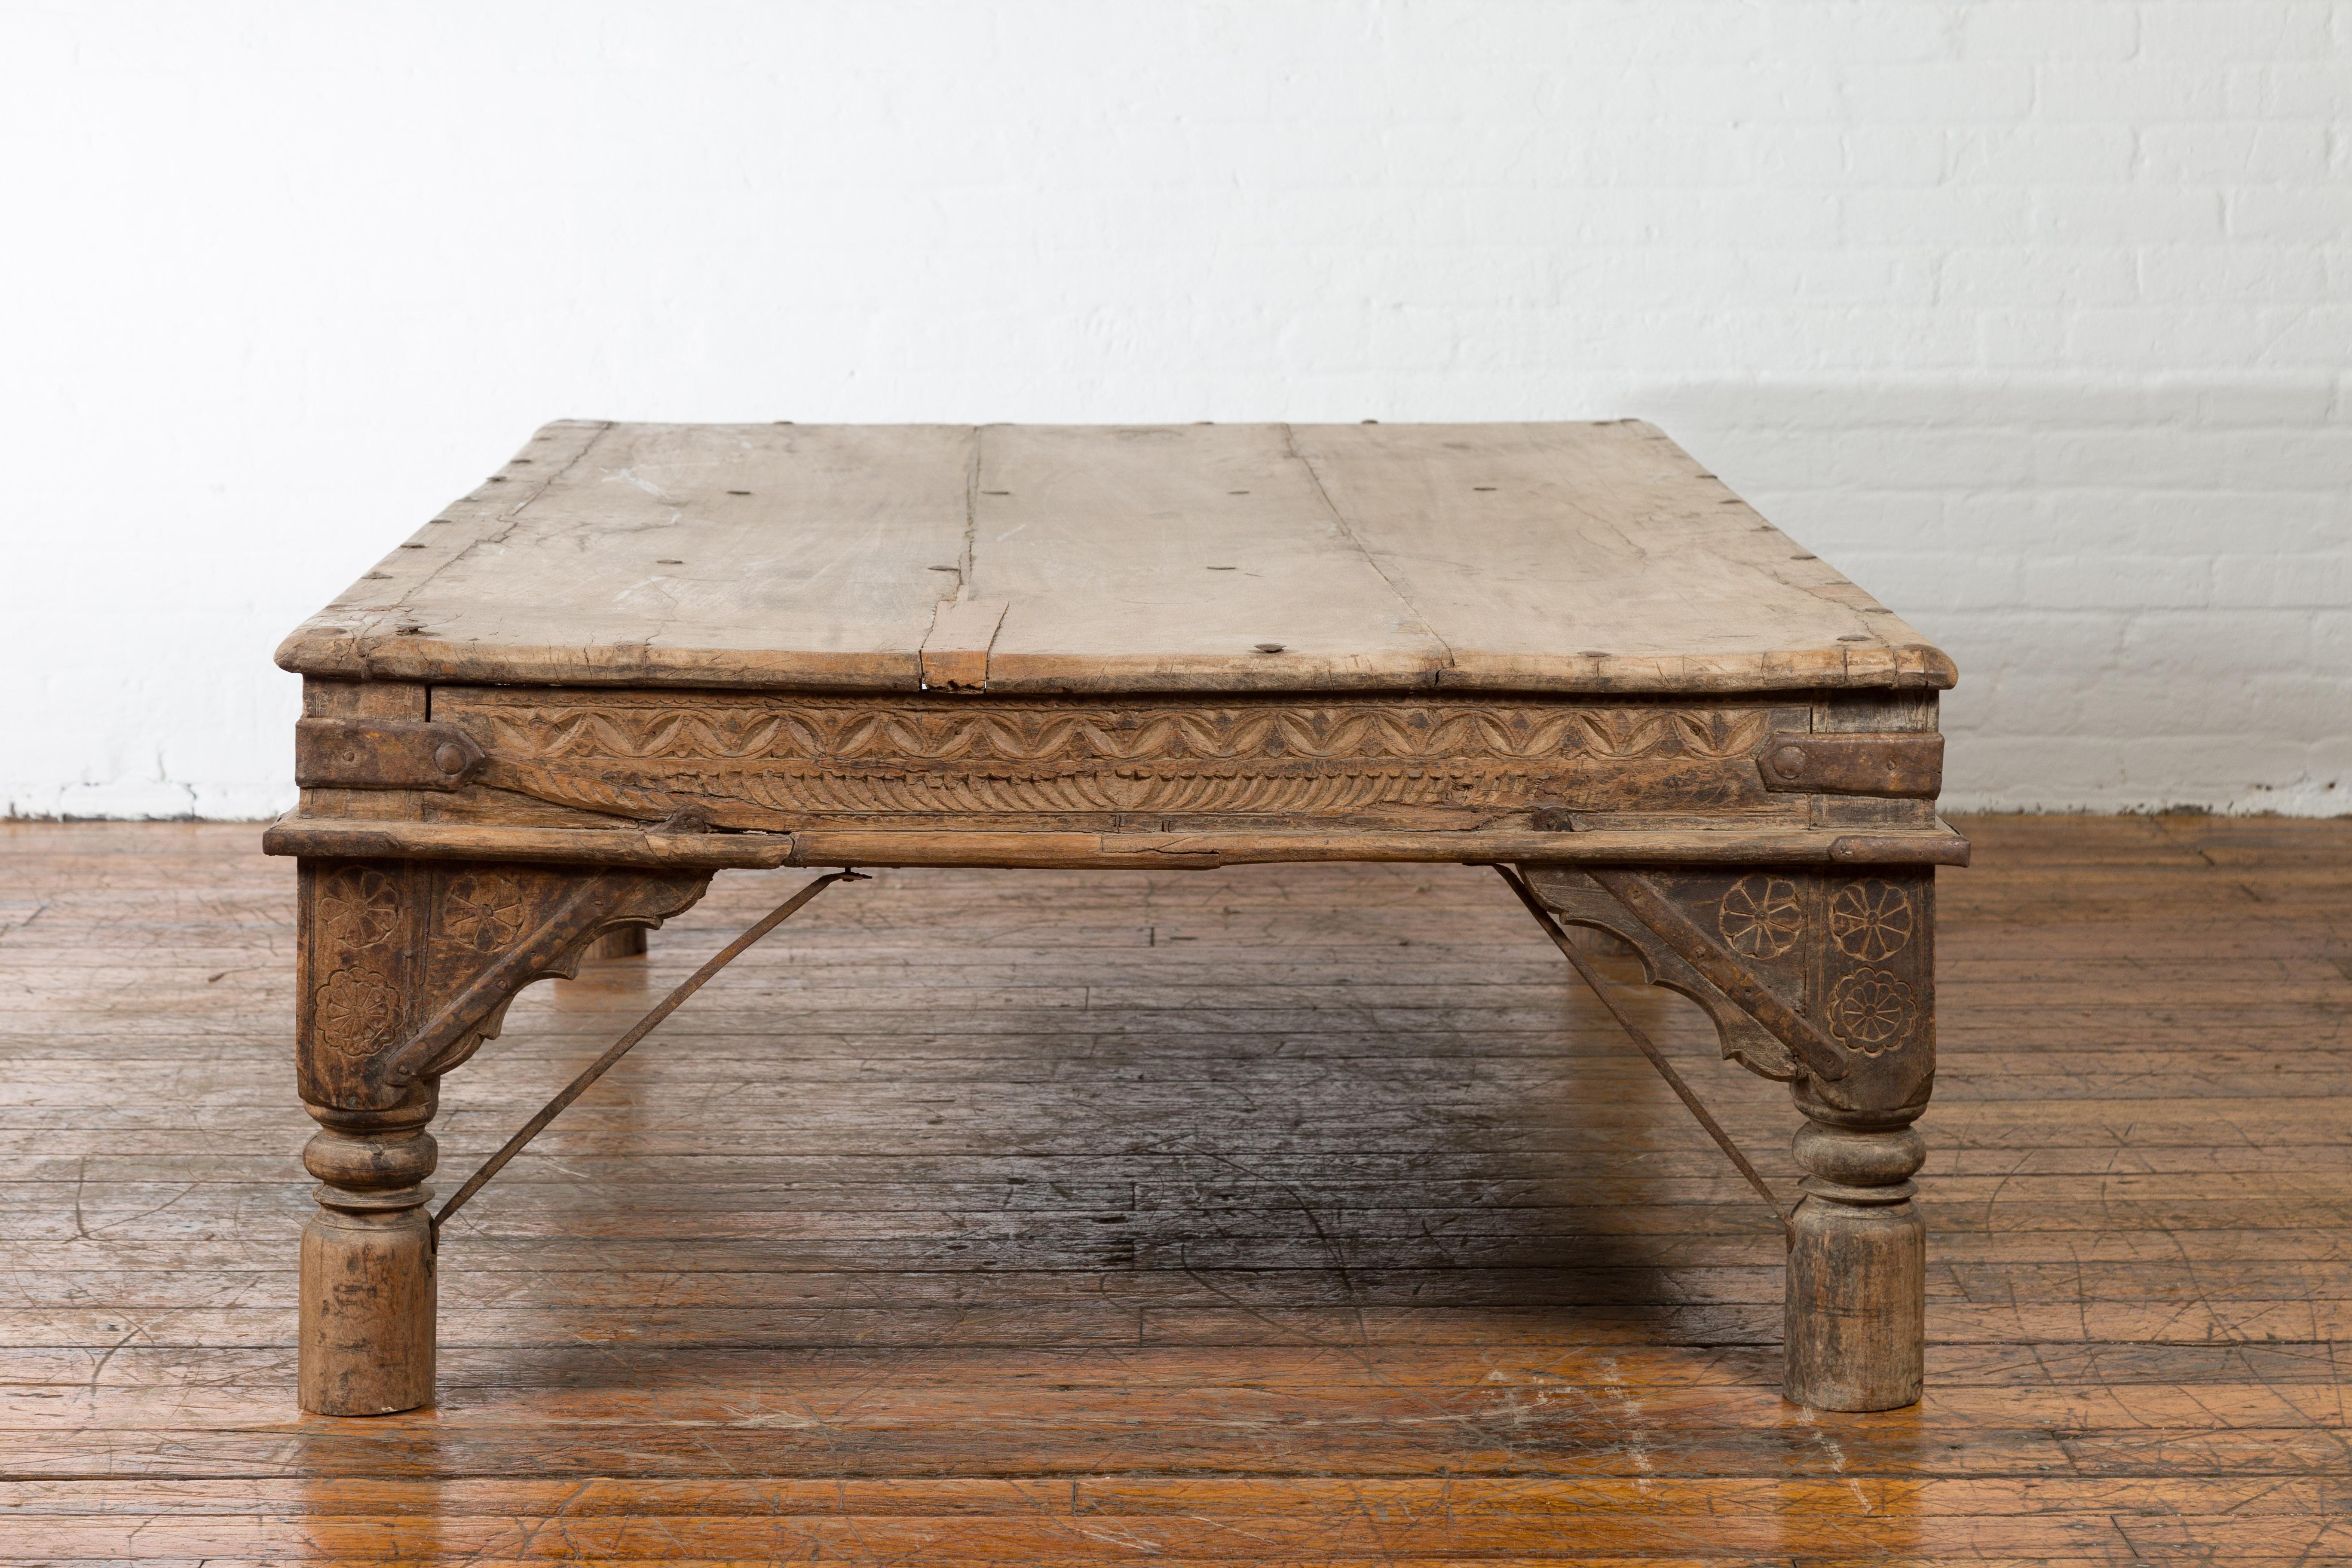 Oversized Antique Temple Door with Studs Made into a Carved Coffee Table 6